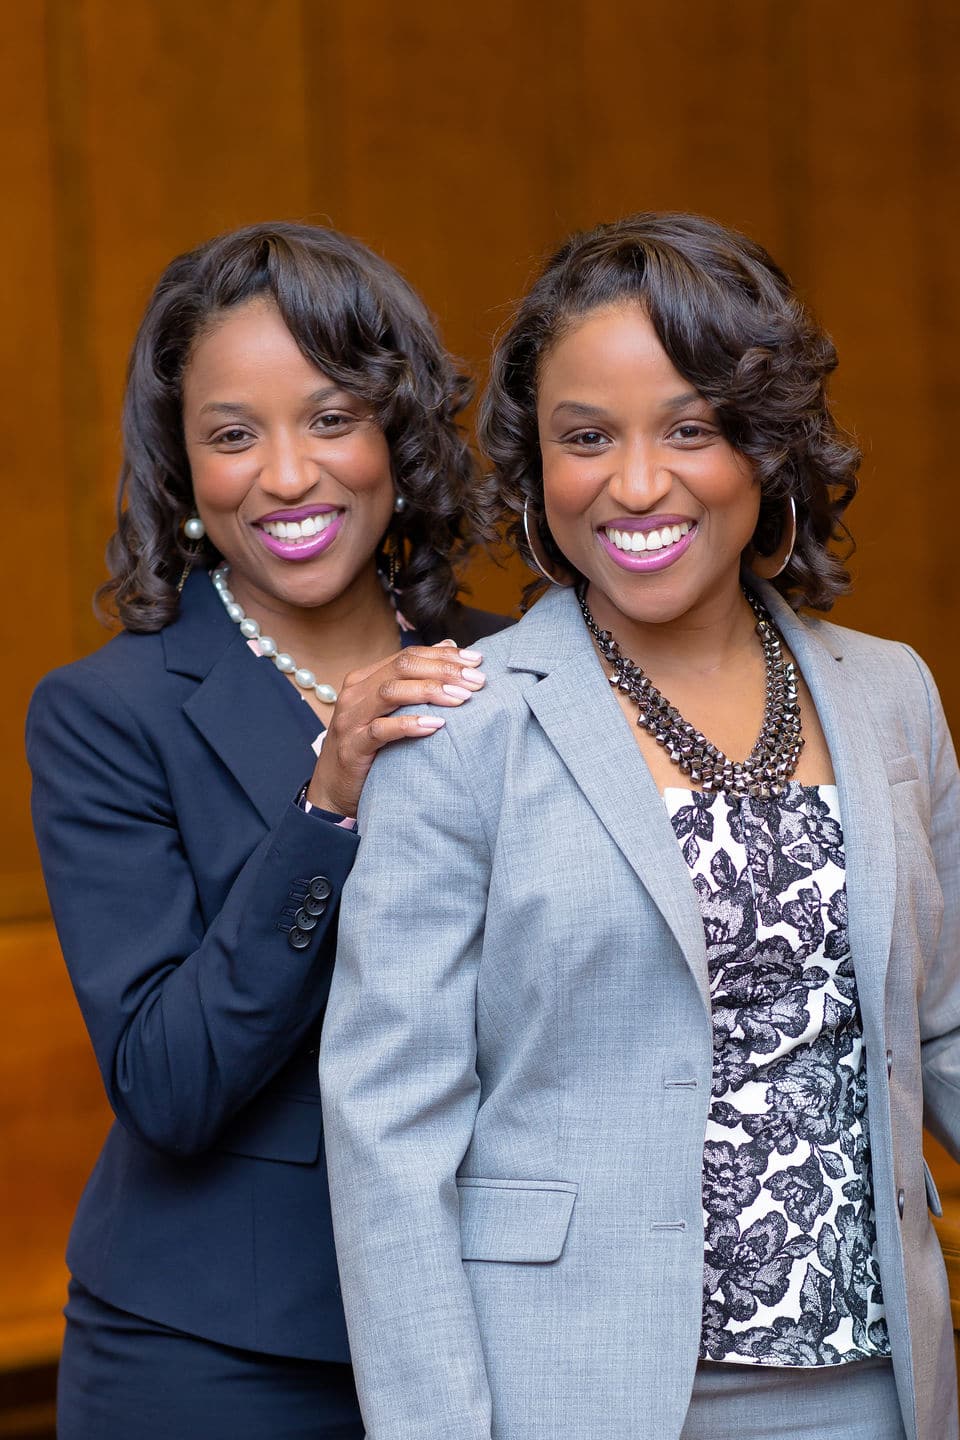 Meet adorable twin sisters who serve simultaneously as court judges